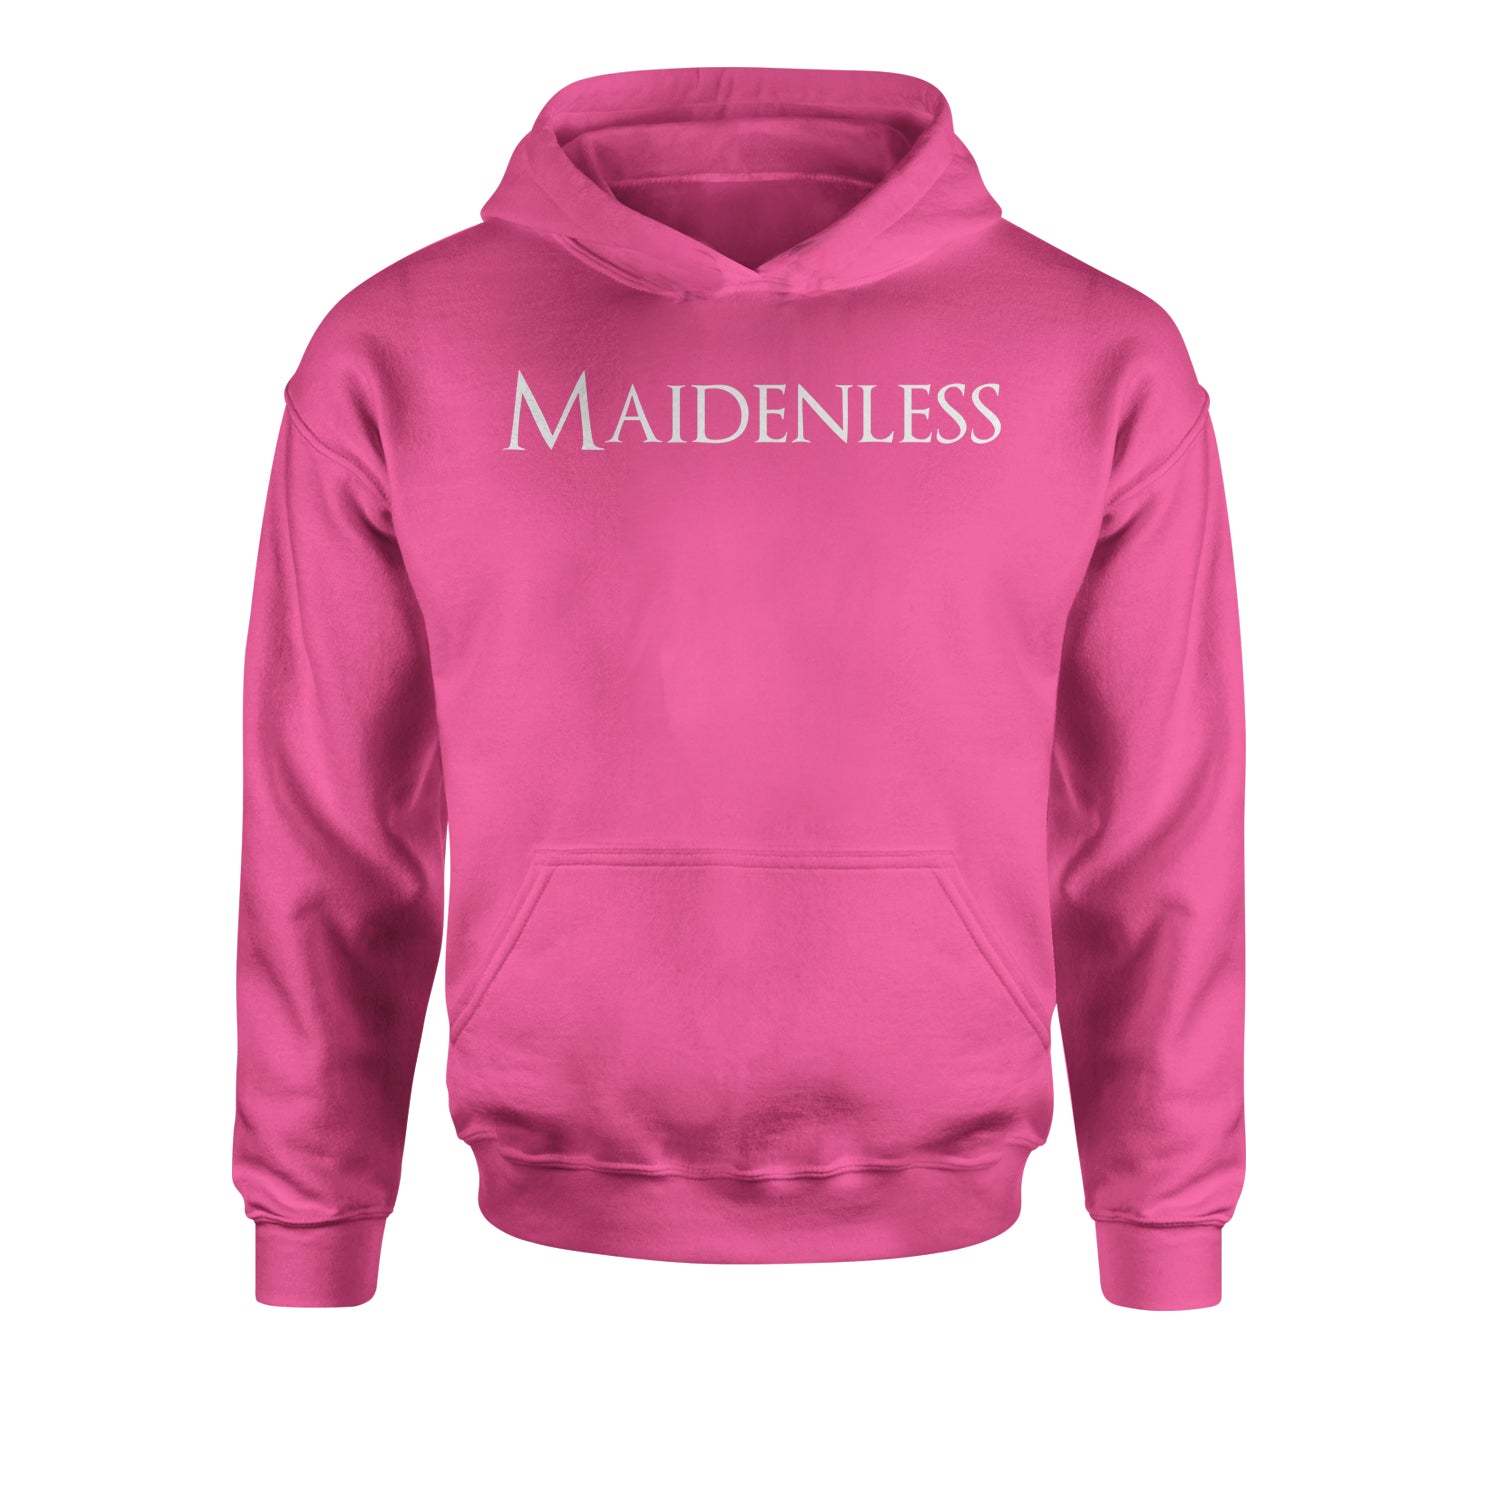 Maidenless Youth-Sized Hoodie elden, game, video by Expression Tees